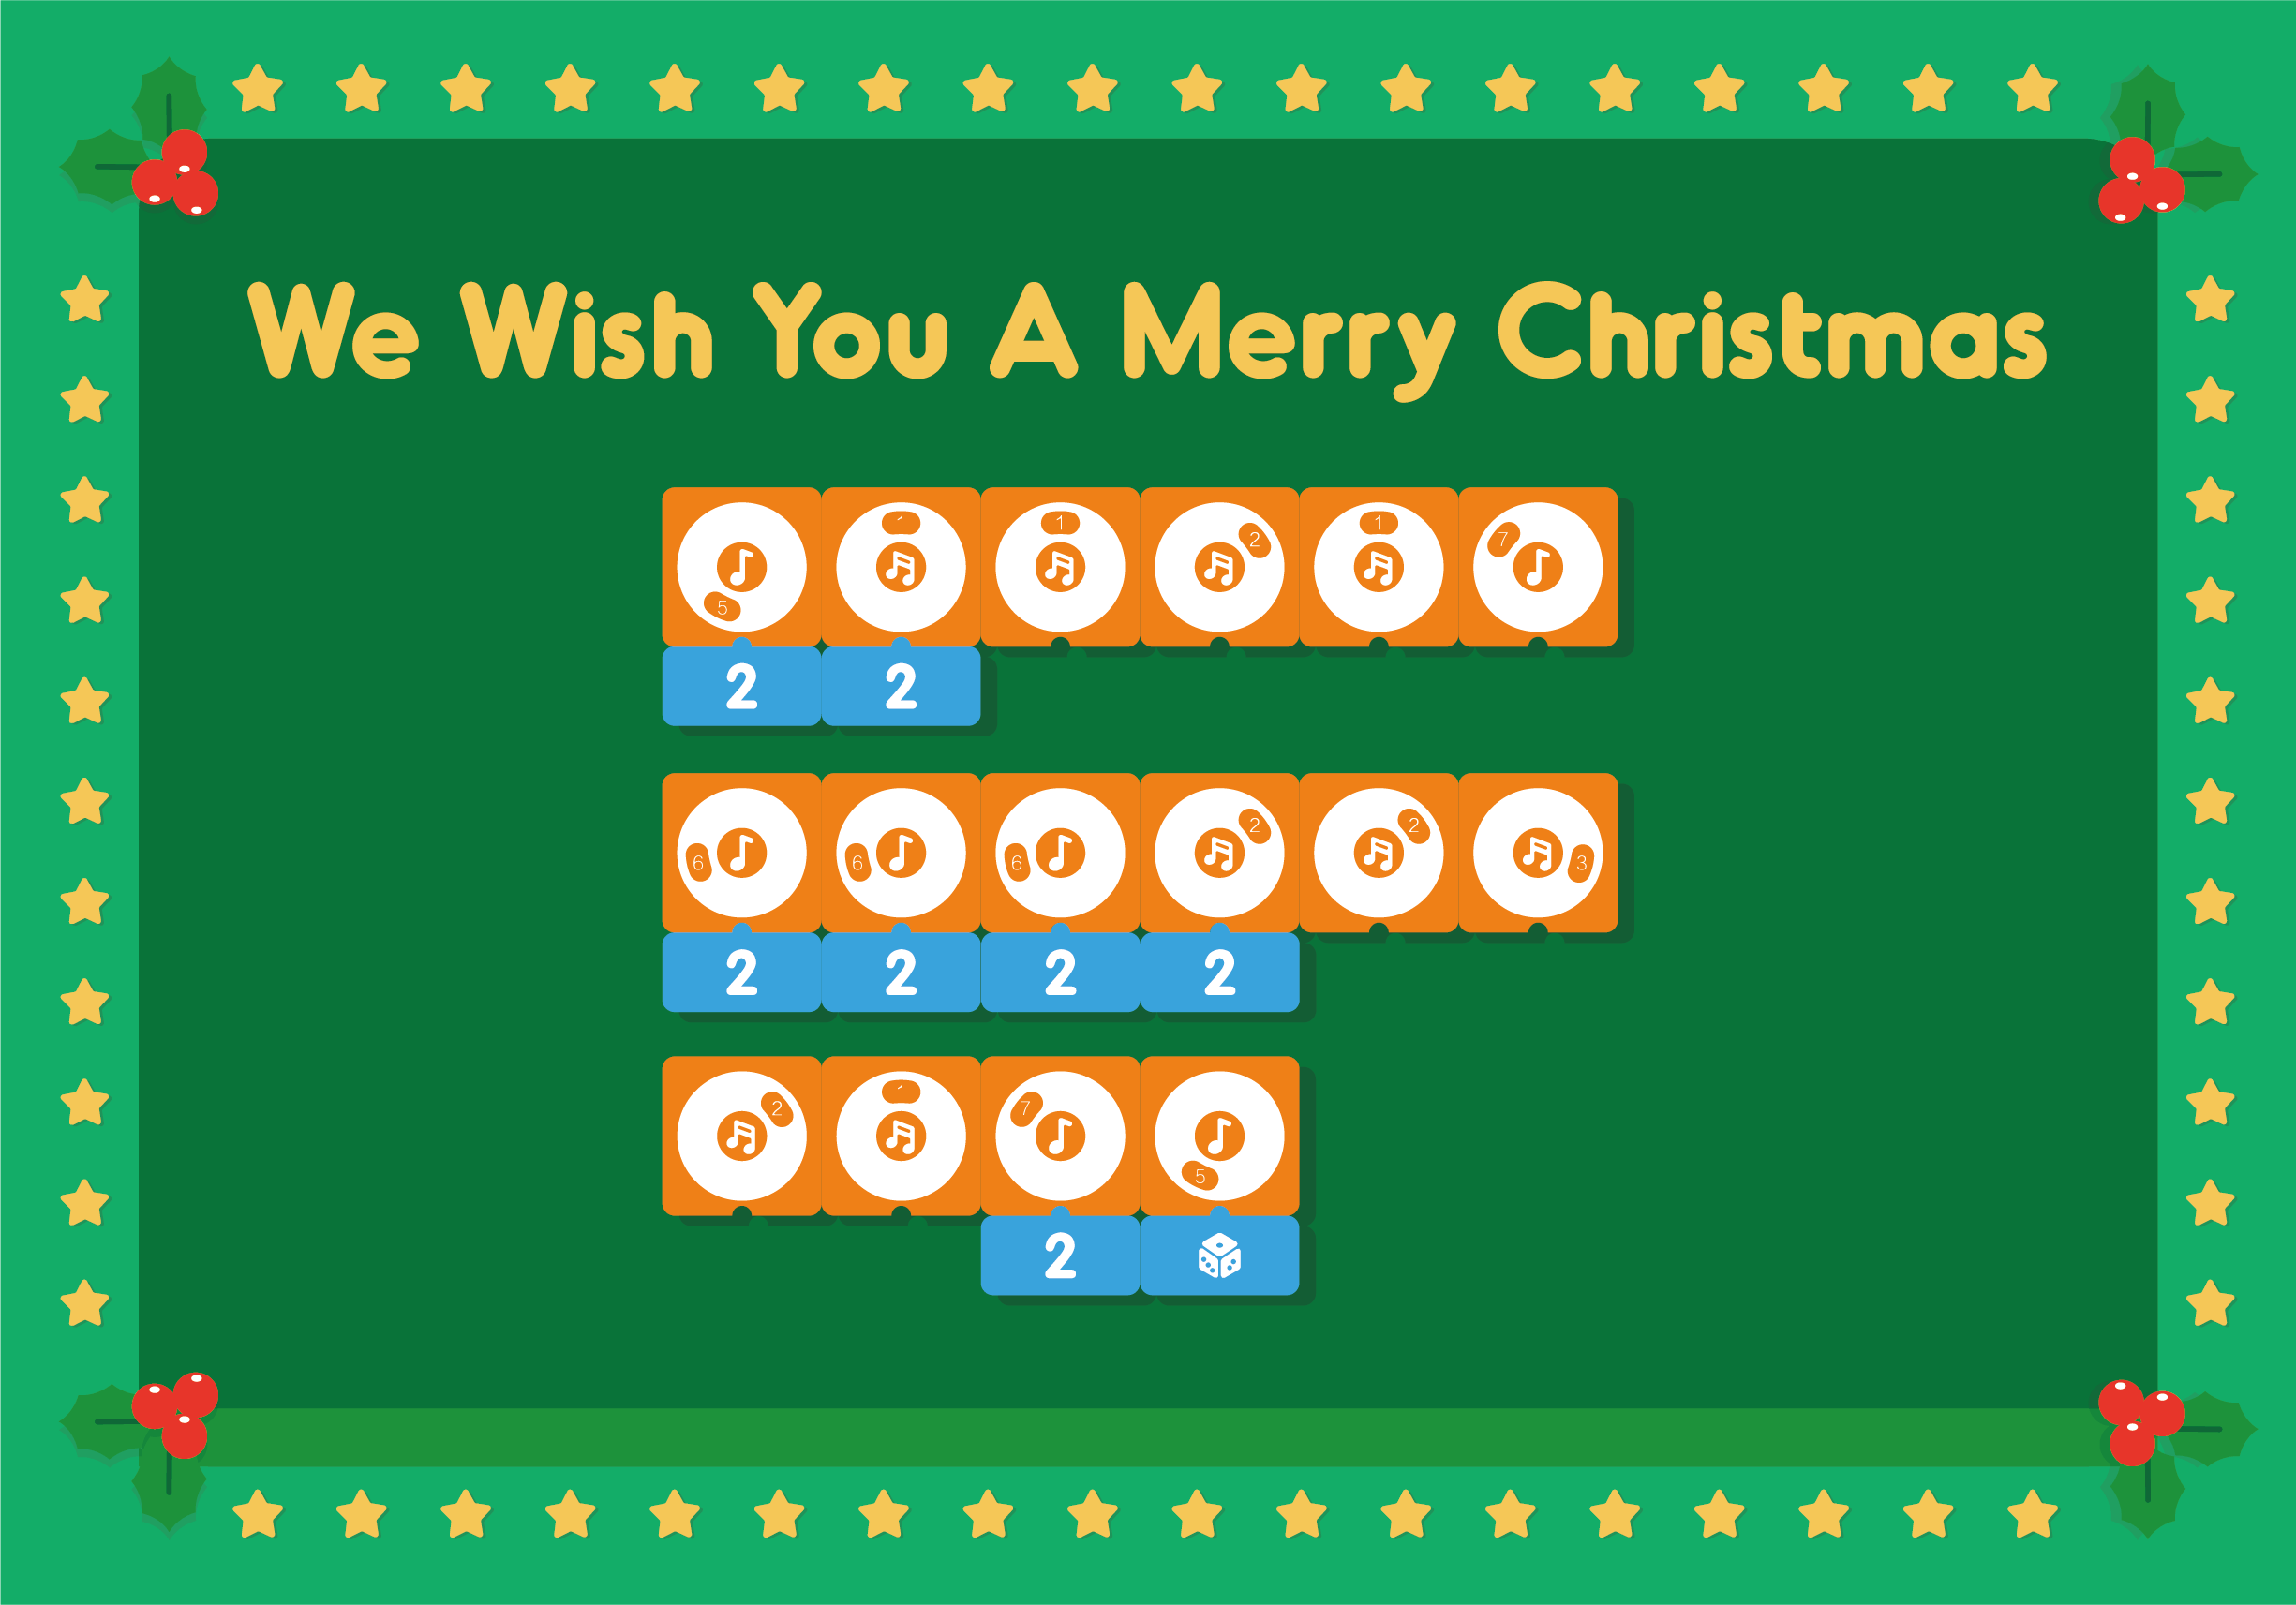 We Wish You A Merry Christmas - Coding Toys - Matatalab